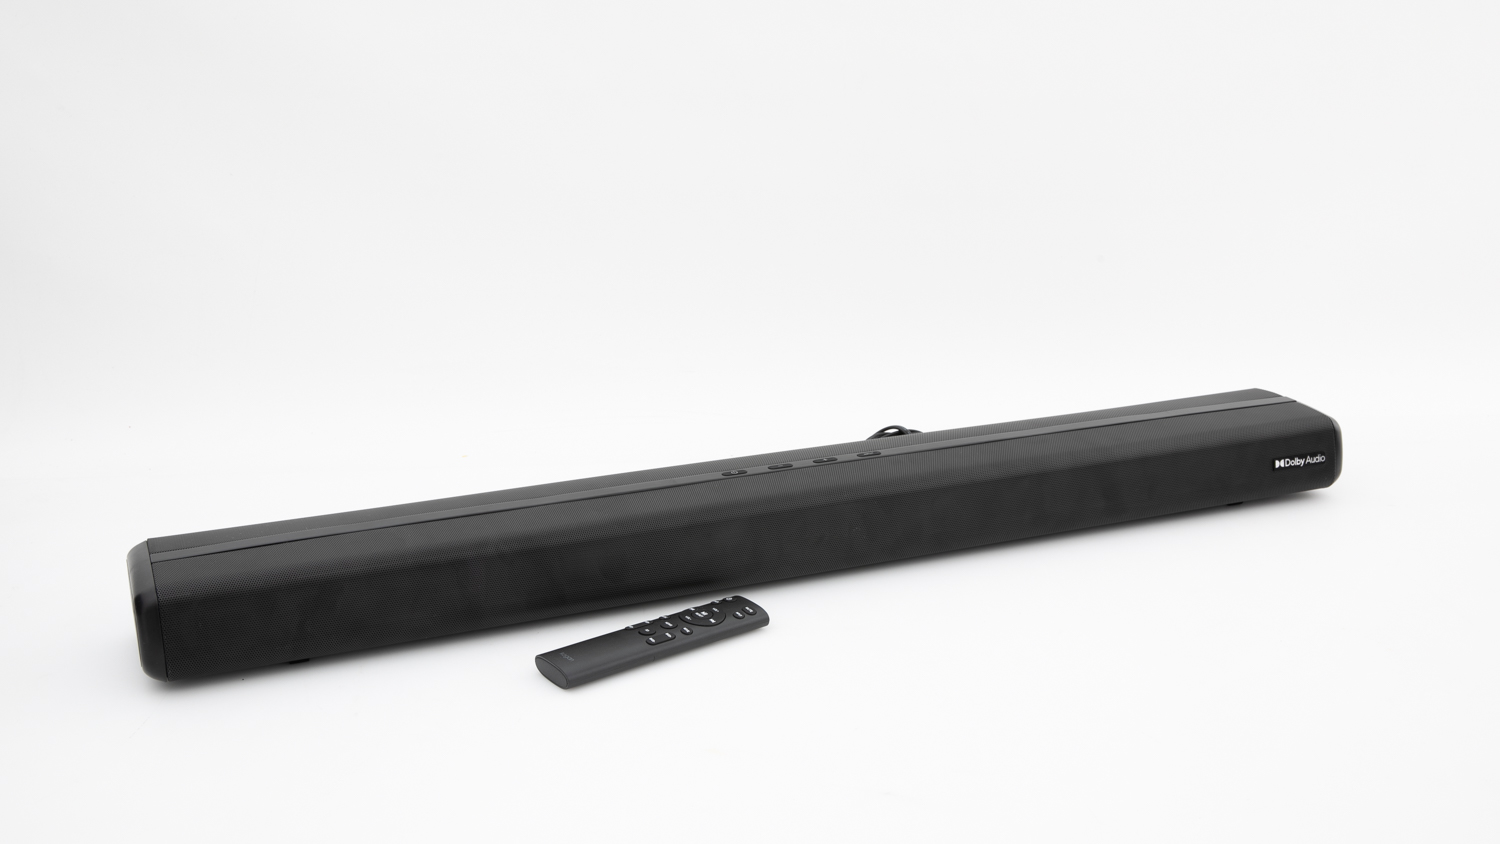 Kogan 2.1Ch 80W Dolby Soundbar with Built-in Subwoofer carousel image